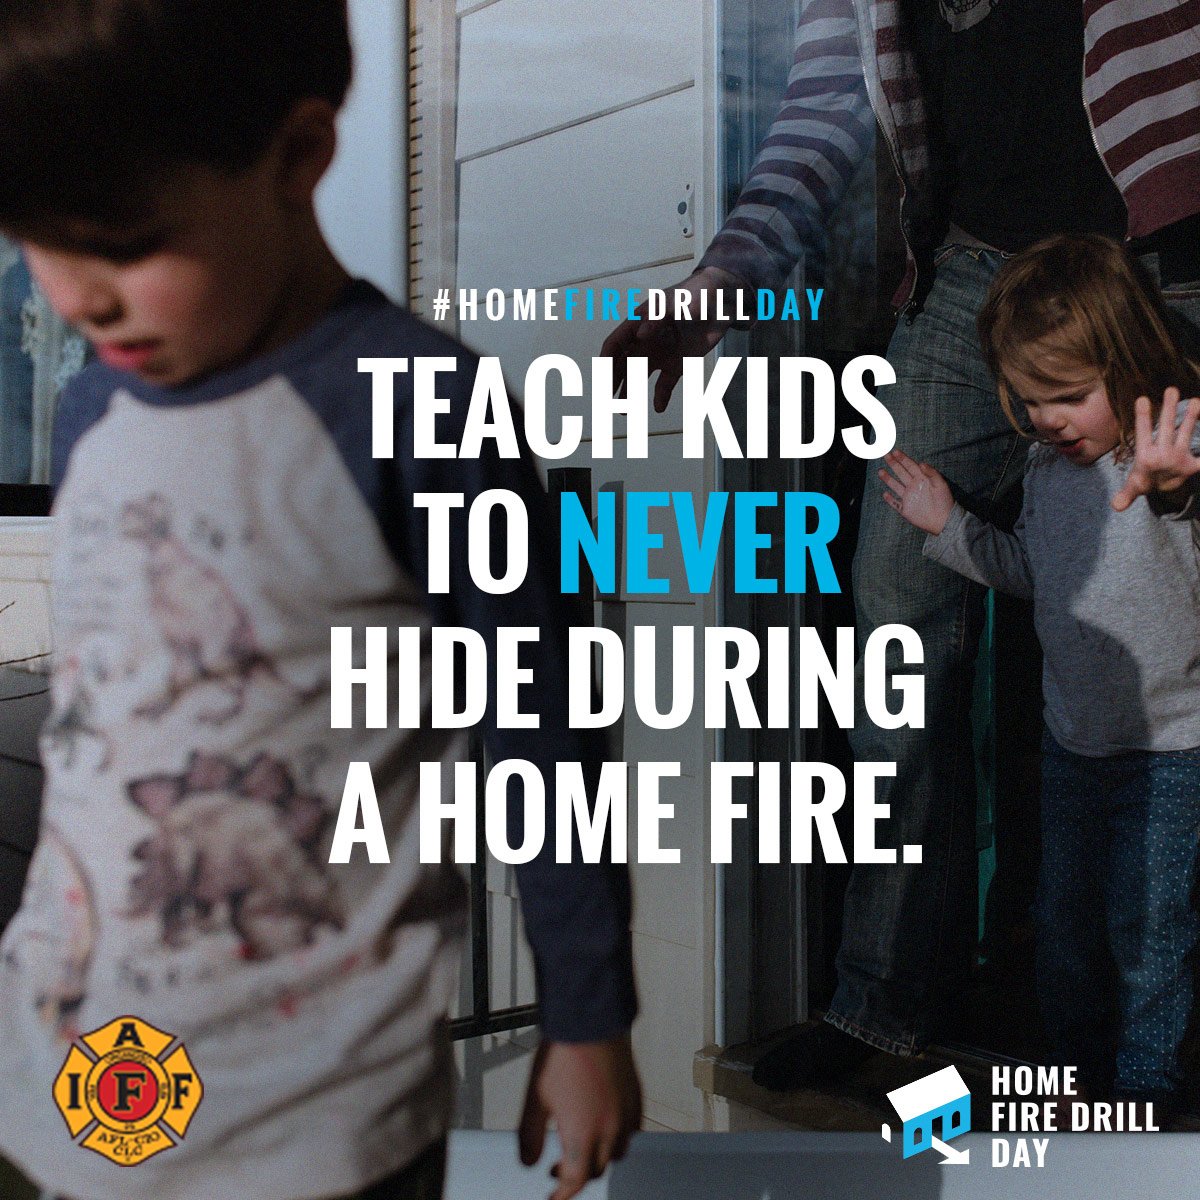 It is crucial to teach your kids to never hide during a home fire. Practice a fire drill with your family, so that when an emergency happens, everyone knows what to do and where to go! #HPFF #MyHendersonFire #HomeFireDrill #MakeSafeHappen